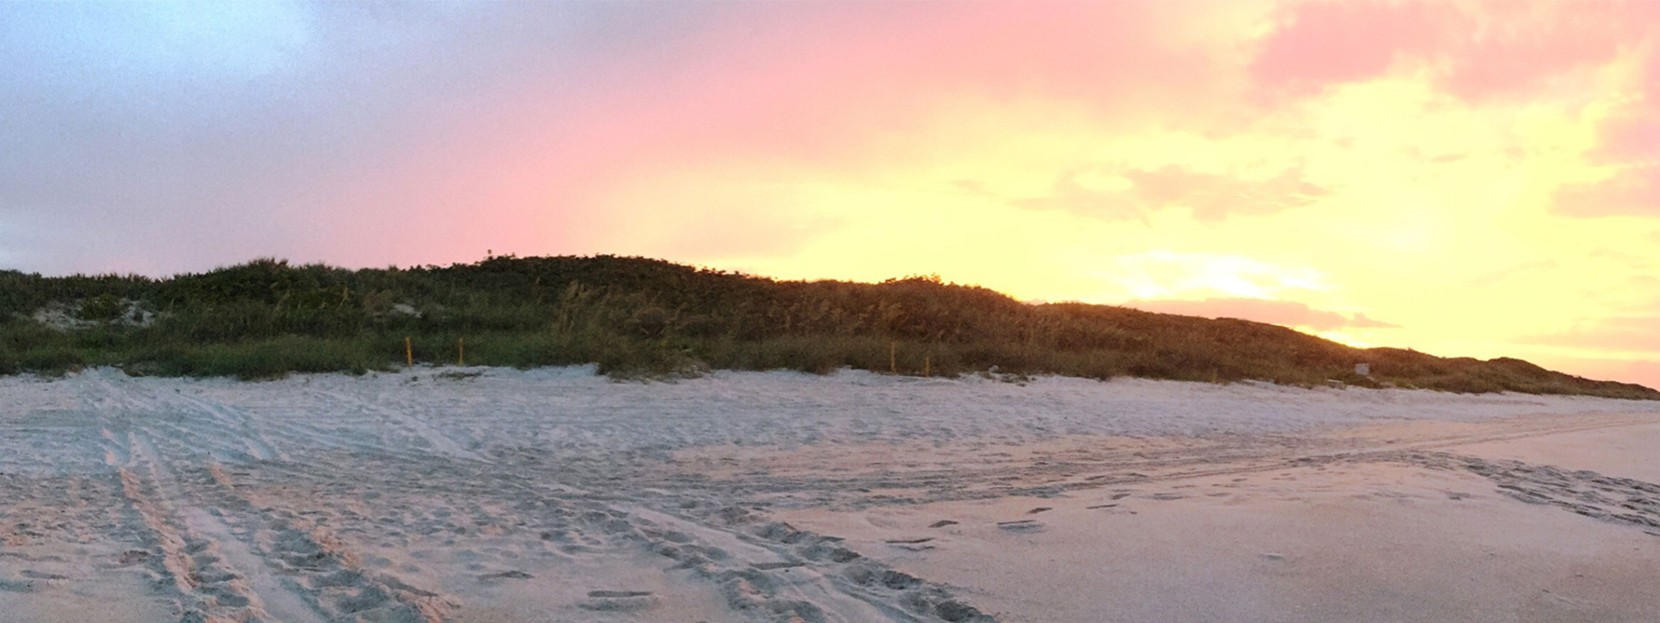 Sunset over Canaveral National Seashore